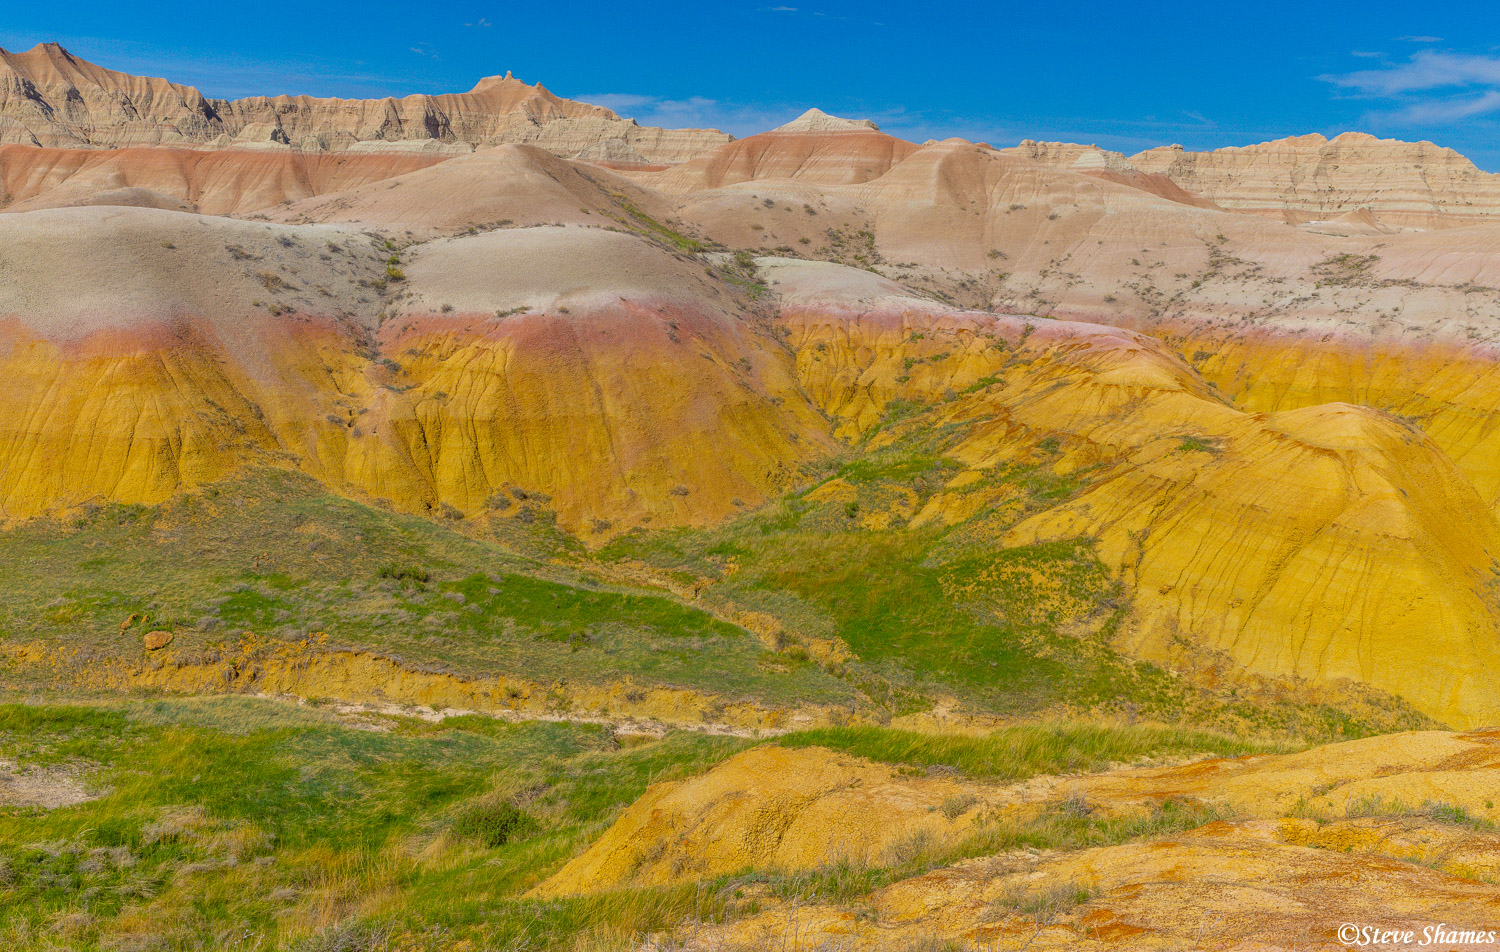 Here is the yellow mounds section of the Badlands.